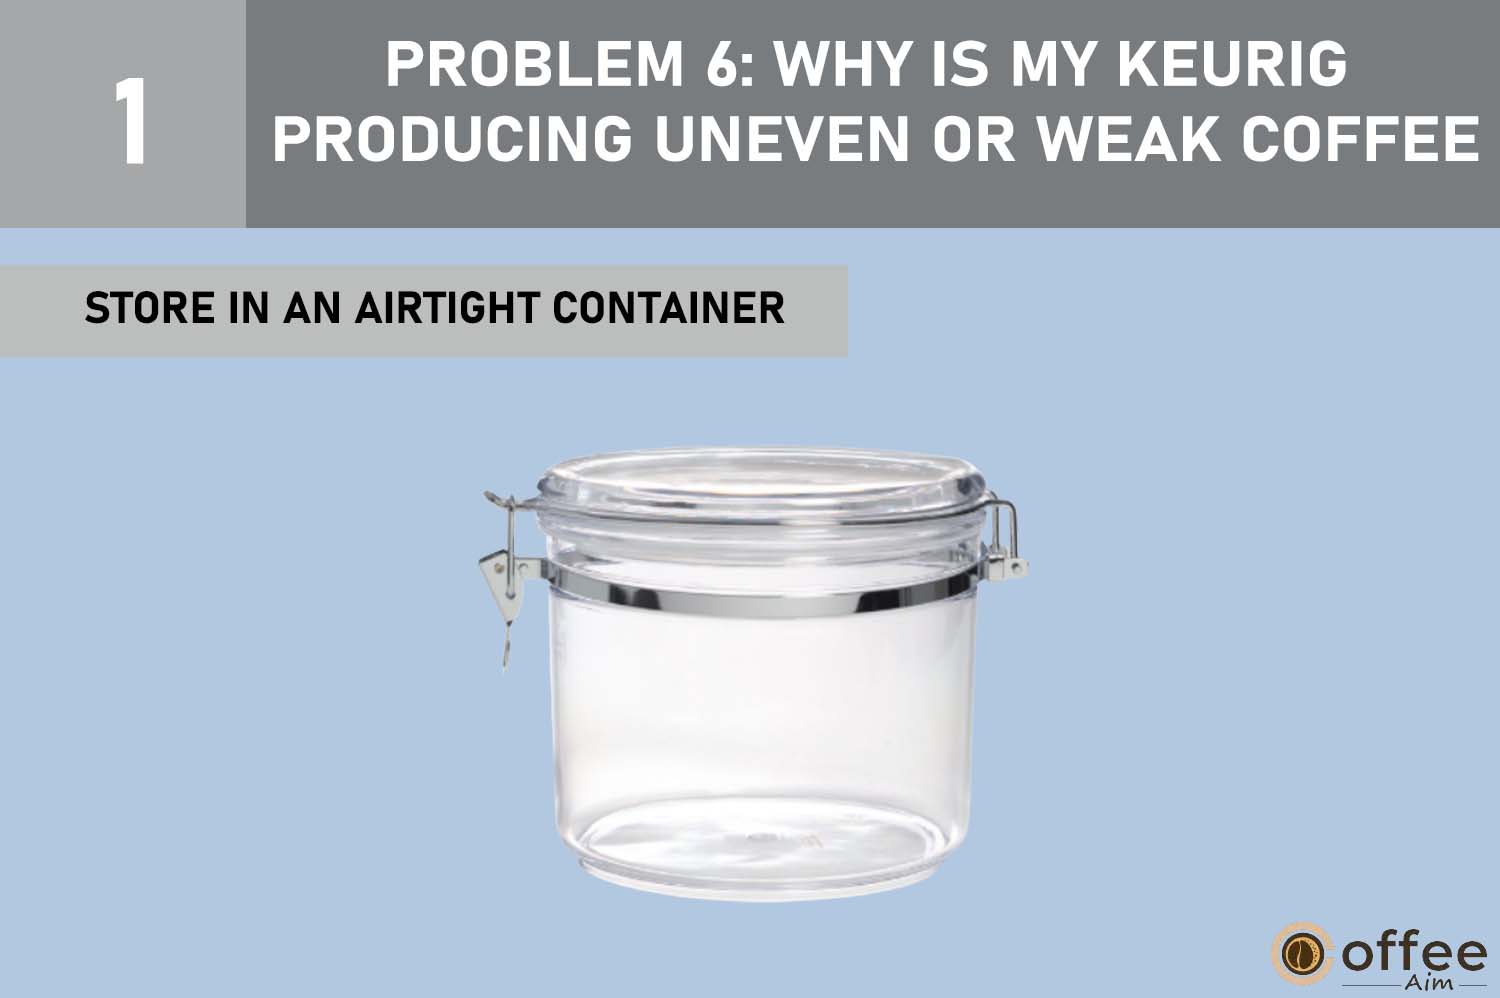 This image provides instructions on "Storing in an Airtight Container" for addressing Problem 6: "Why is My Keurig Producing Uneven or Weak Coffee?" as part of our "Keurig K-Mini Plus Problems" article.





